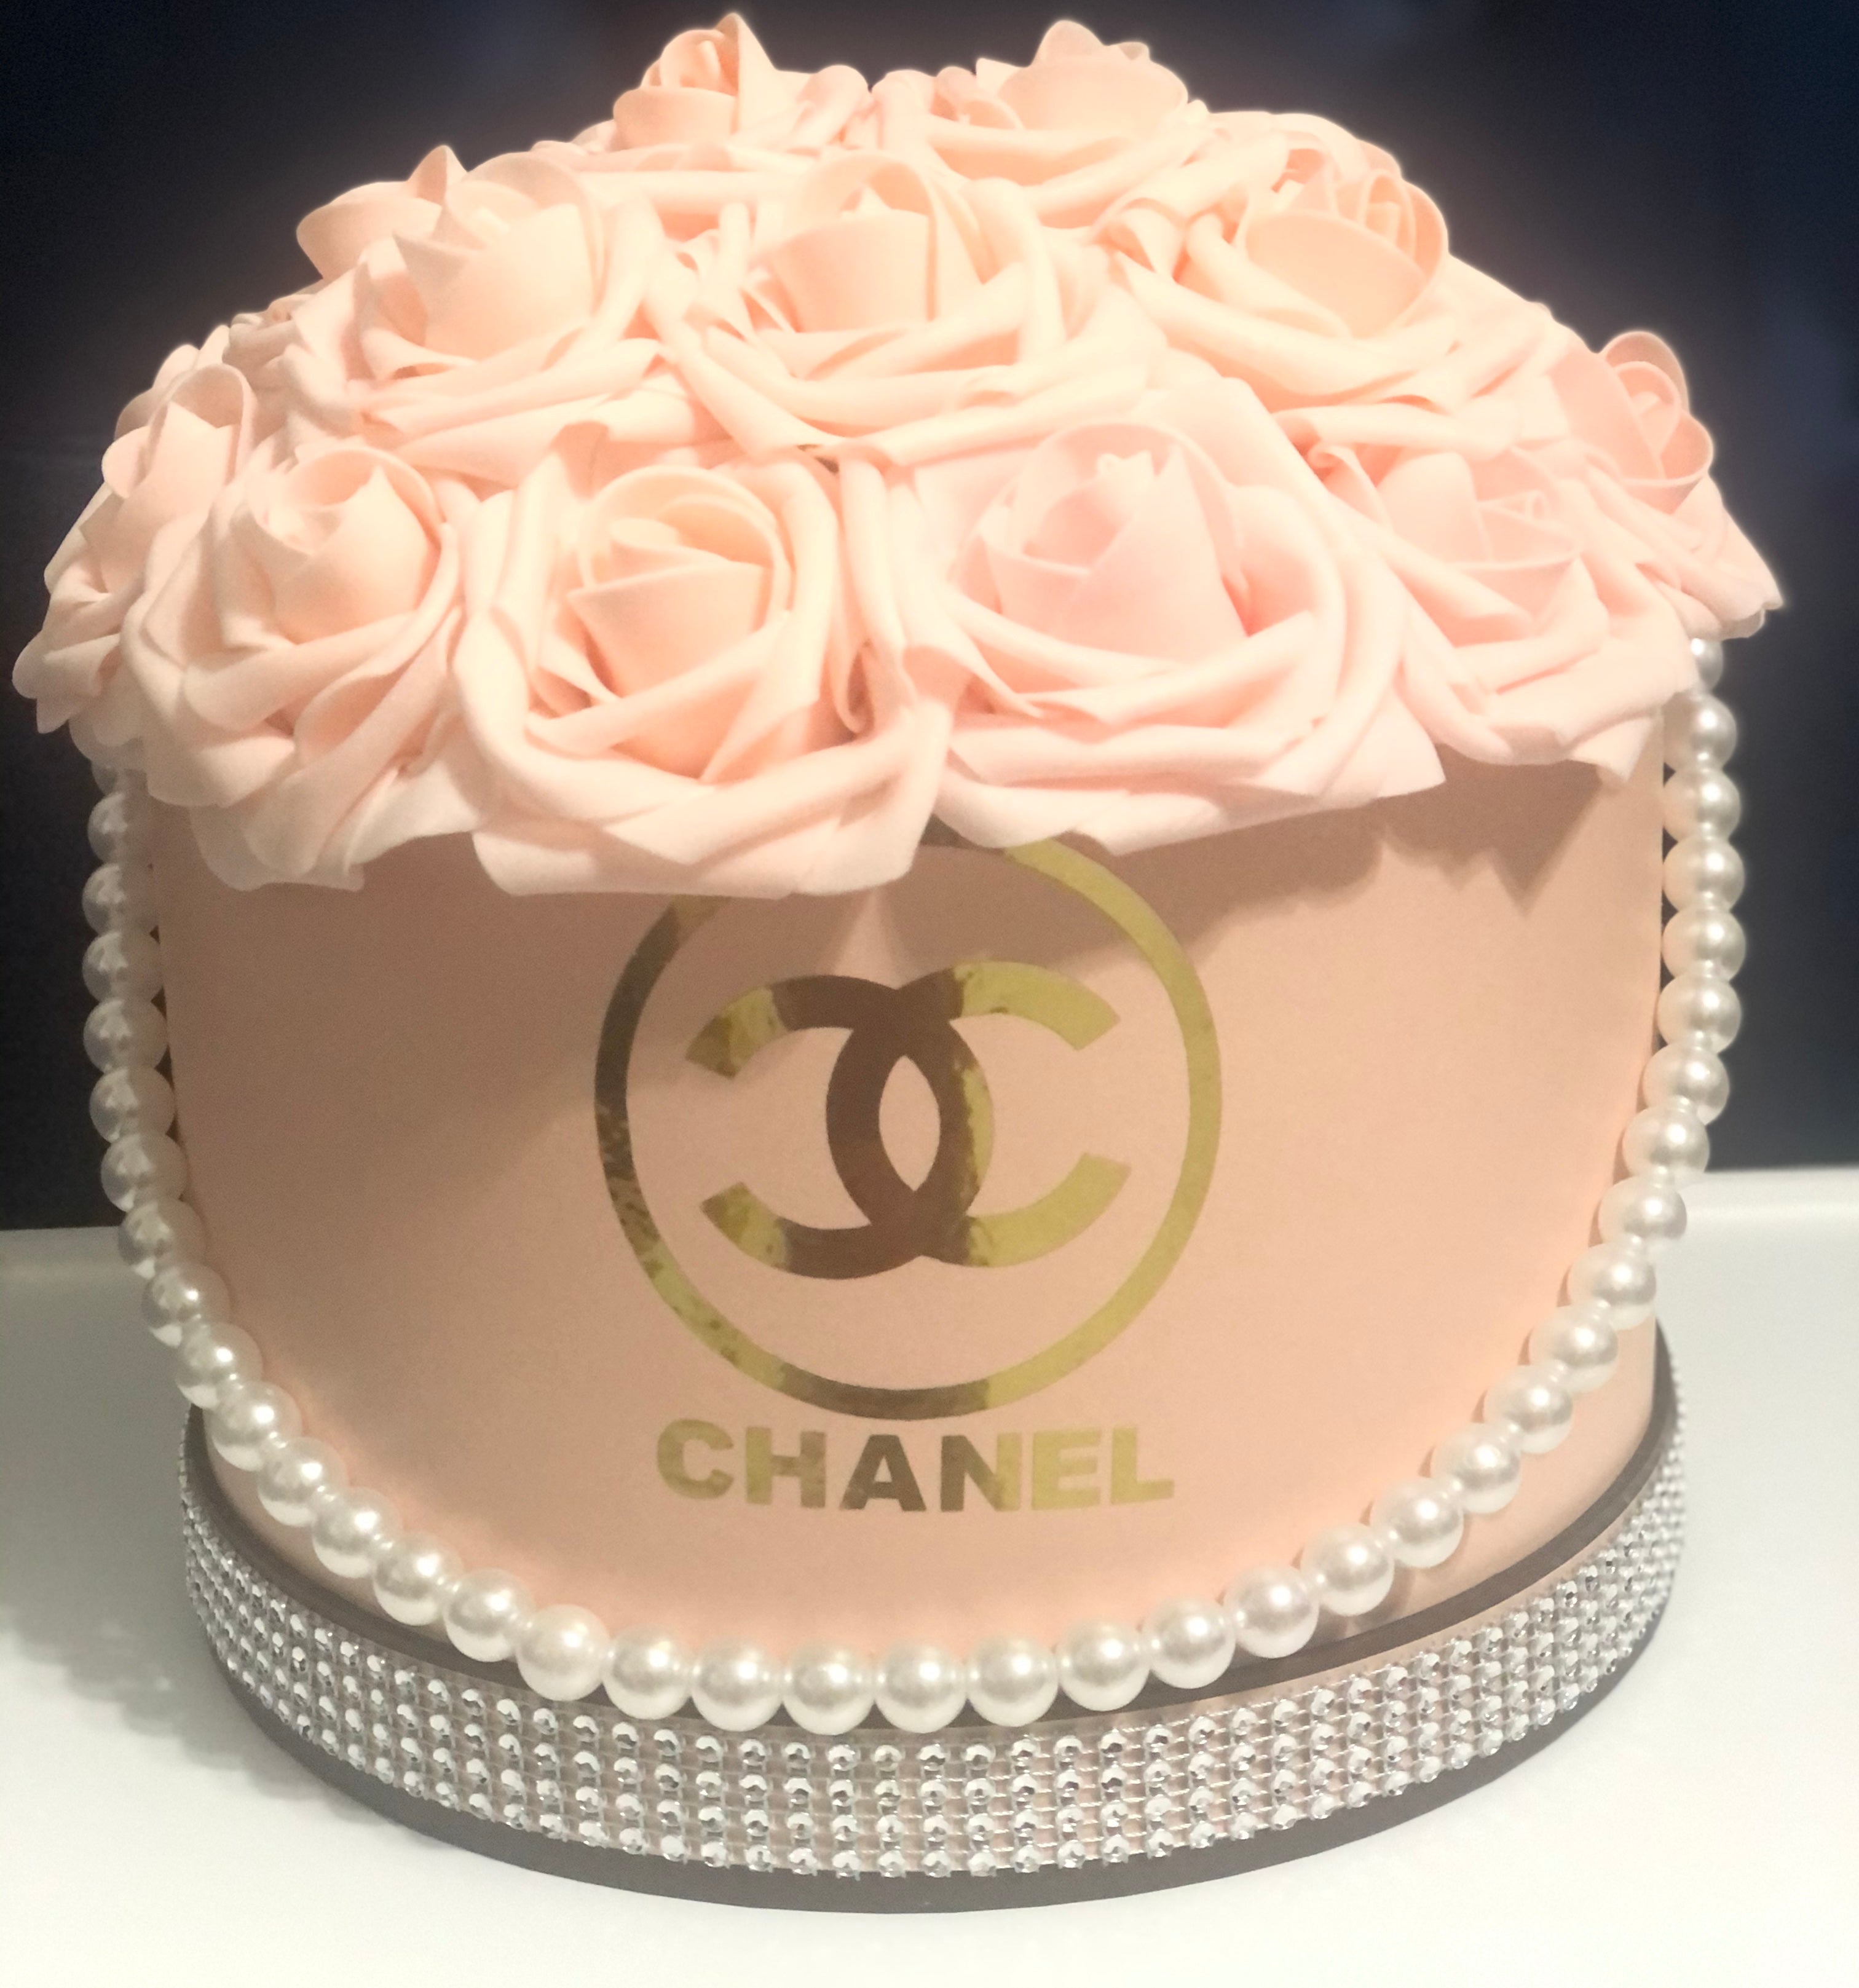 By @blossombloomsevents#chanelclassic #chanelparty #chanellove  #chanelvintage…  Chanel birthday party decoration, Chanel birthday party,  Coco chanel birthday party